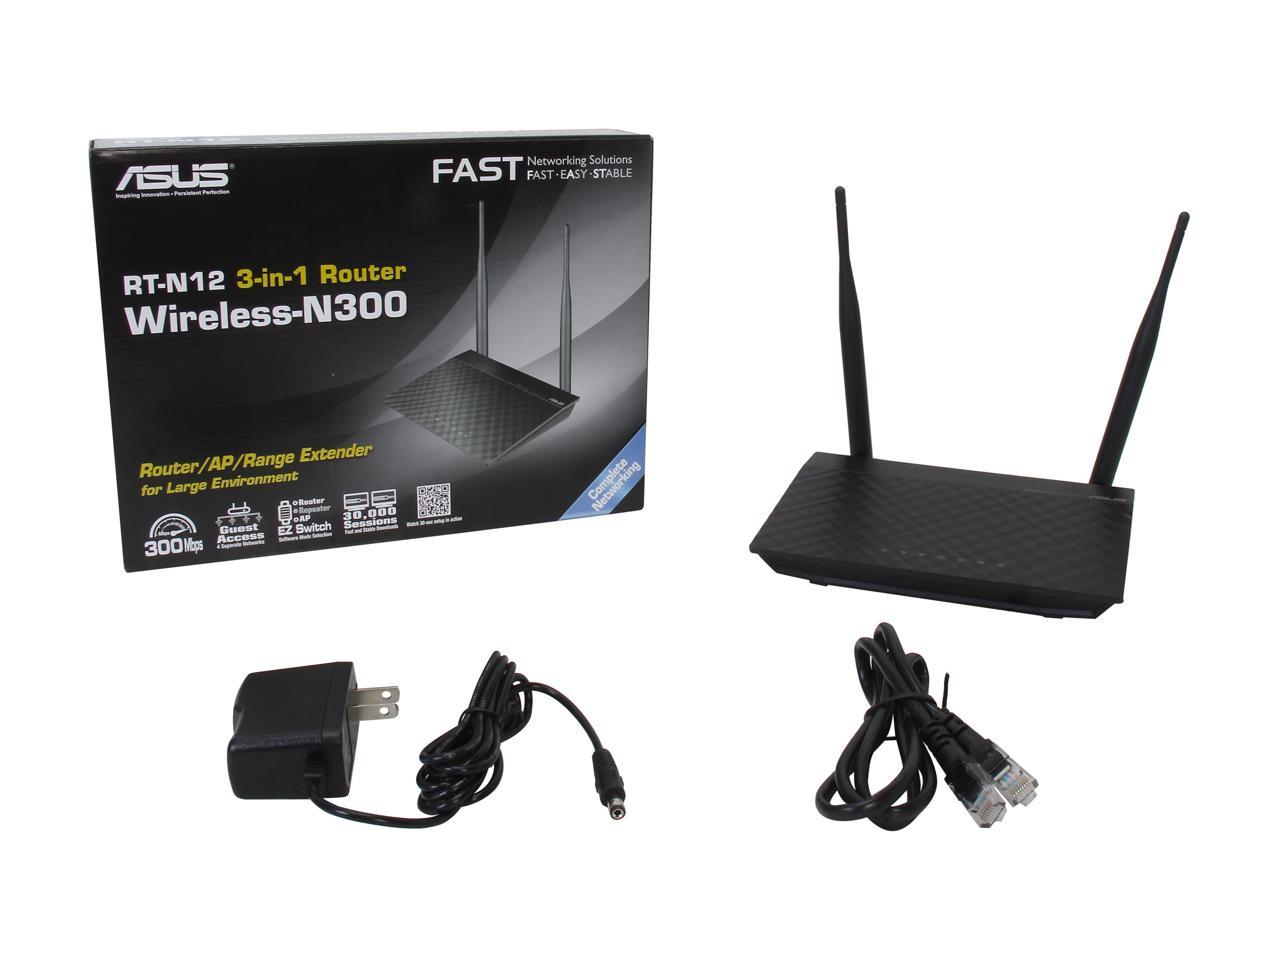 ASUS RT-N12 N300 Router 2T2R MIMO Technology, HD Video Streaming, VoIP, Up to 300 Mbps - Newegg.com